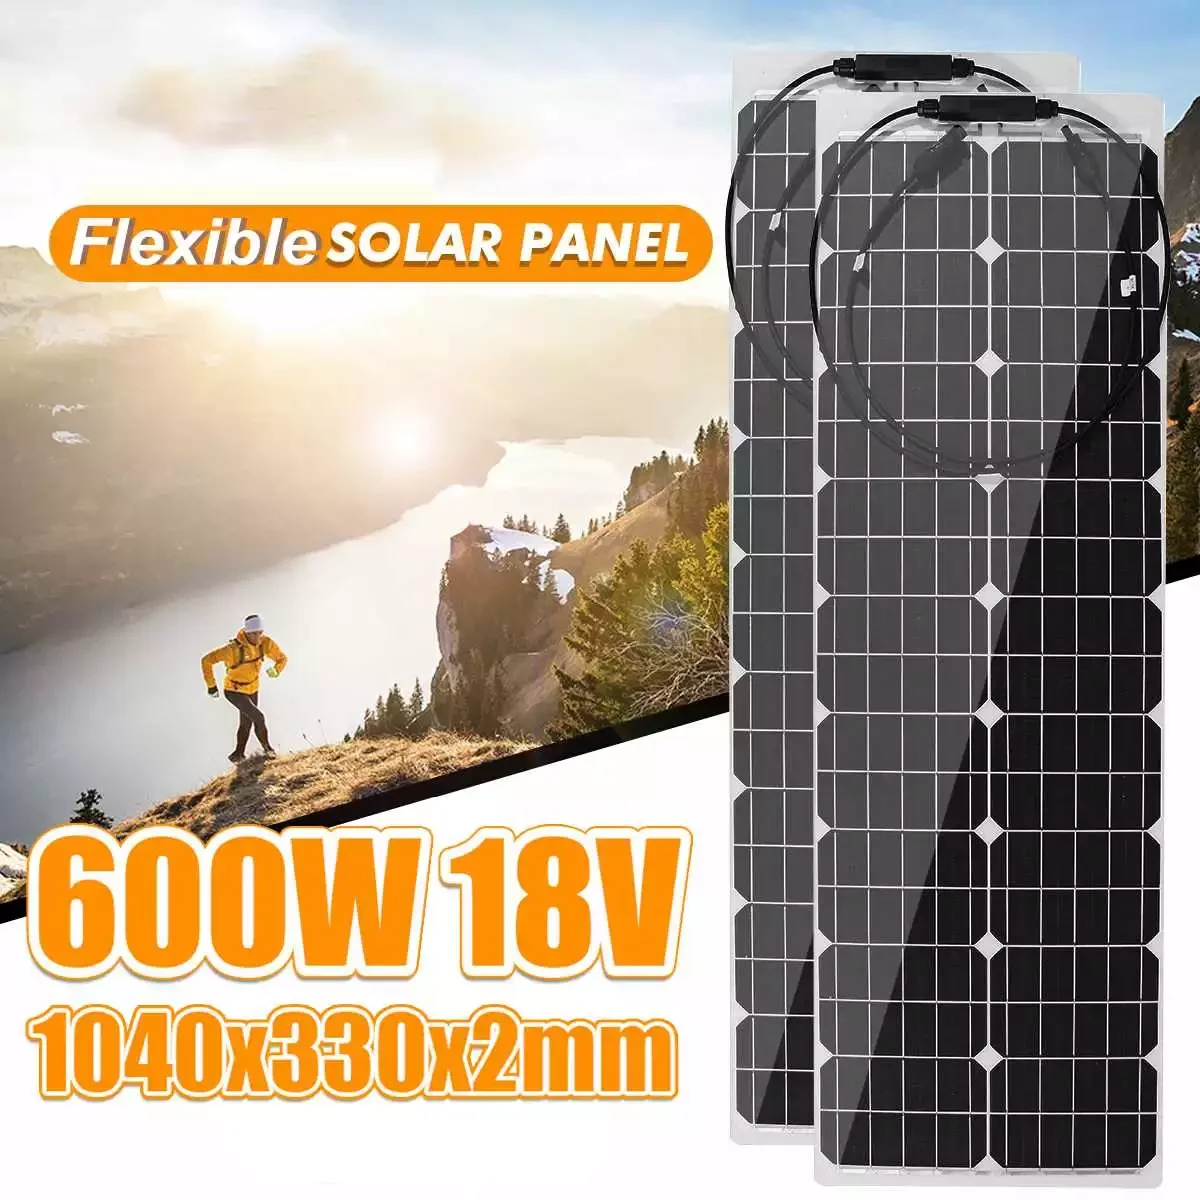 

600W 18V Flexible Monocrystallin Solar Panel Solar Battery Charger Waterproof Solar Cells for Home Car Yacht RV Battery Charger